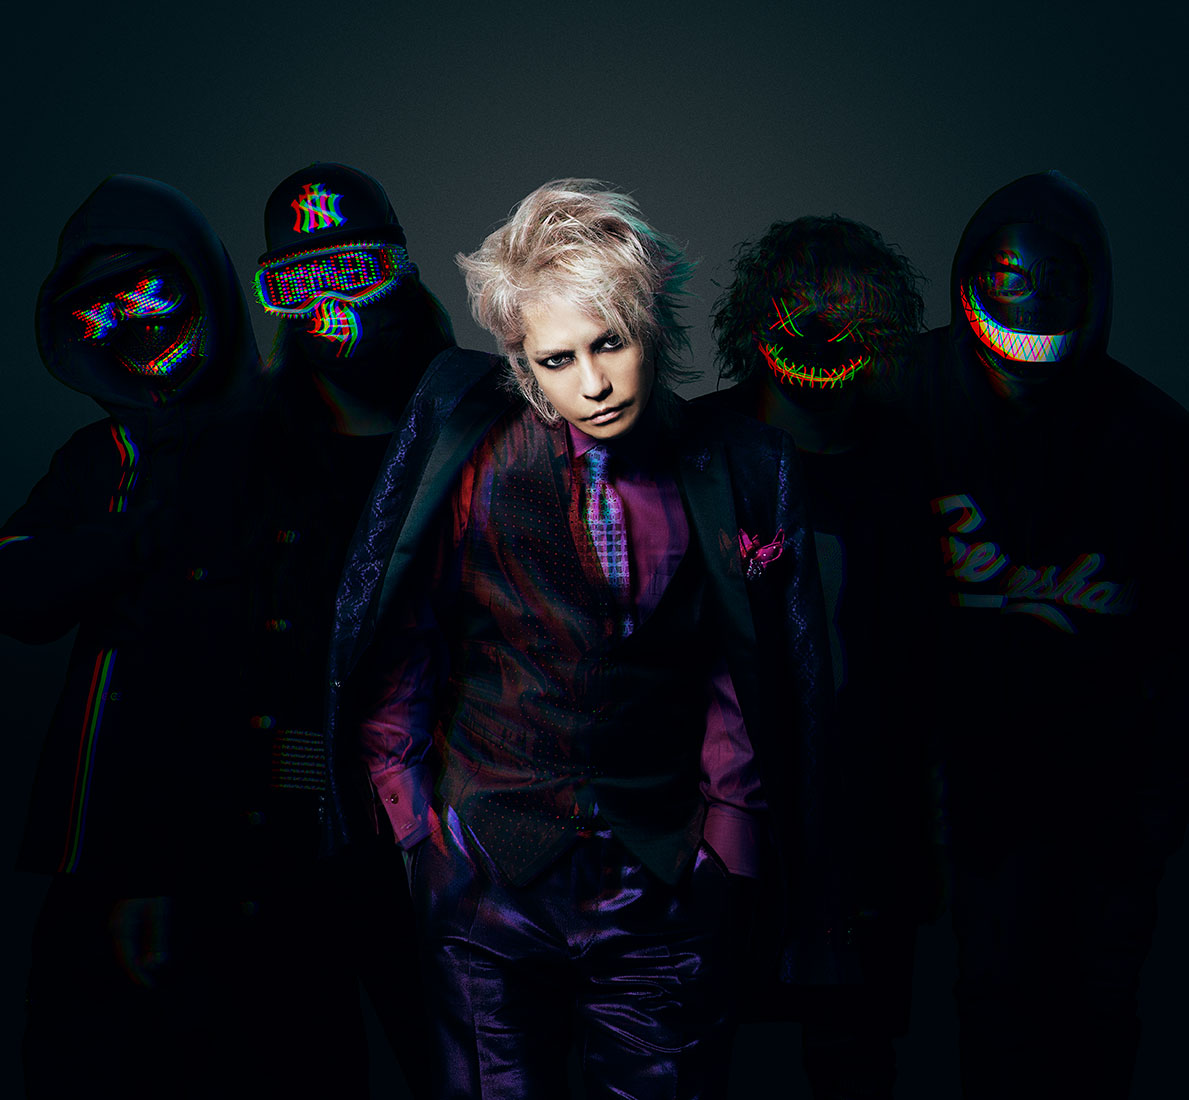 HYDE、ワンマンLIVE『HYDE LIVE 2022』開催決定！恒例のBEAUTY ＆ THE BEAST公演も実施 - 画像一覧（1/1）